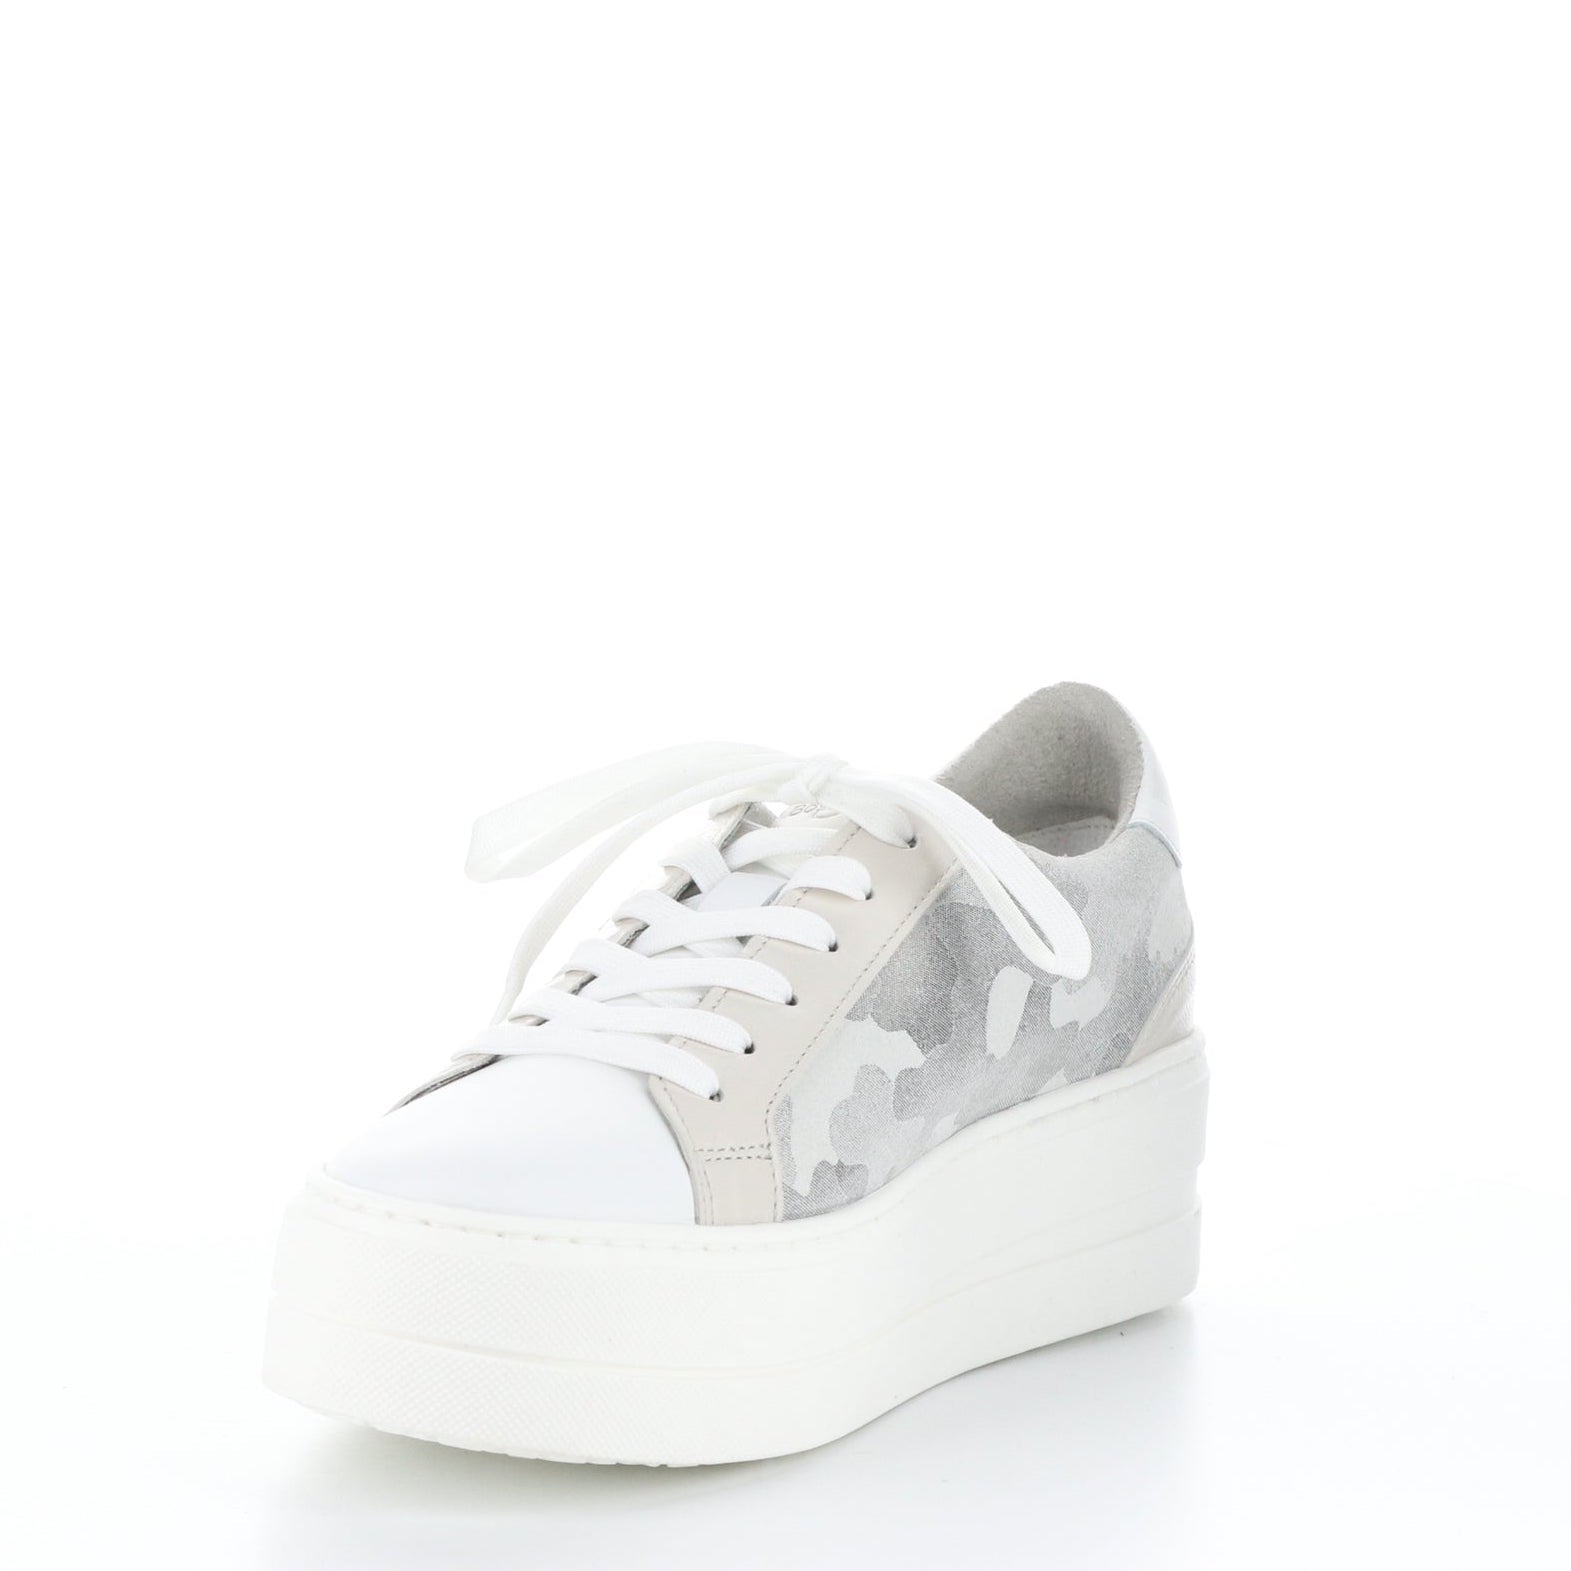 Front inner side view of the the bos & co mardi sneaker. This sneaker is white with grey/silver camo on the sides. The sneaker has a platform sole and a lace up front.